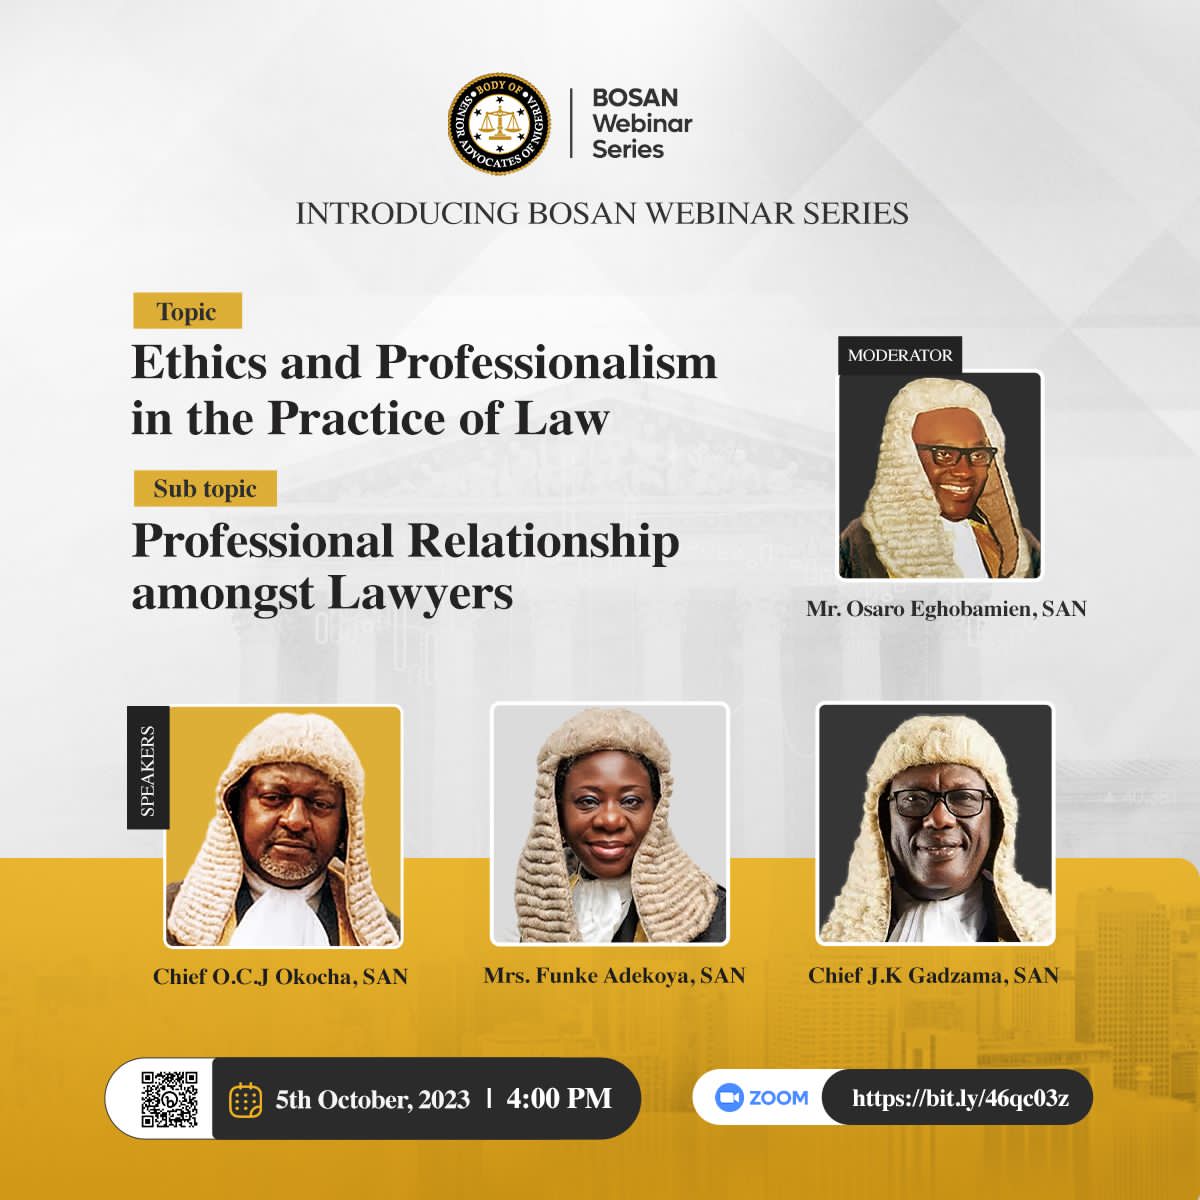 BOSAN Webinar Series Holds Engaging Discussions On Ethics